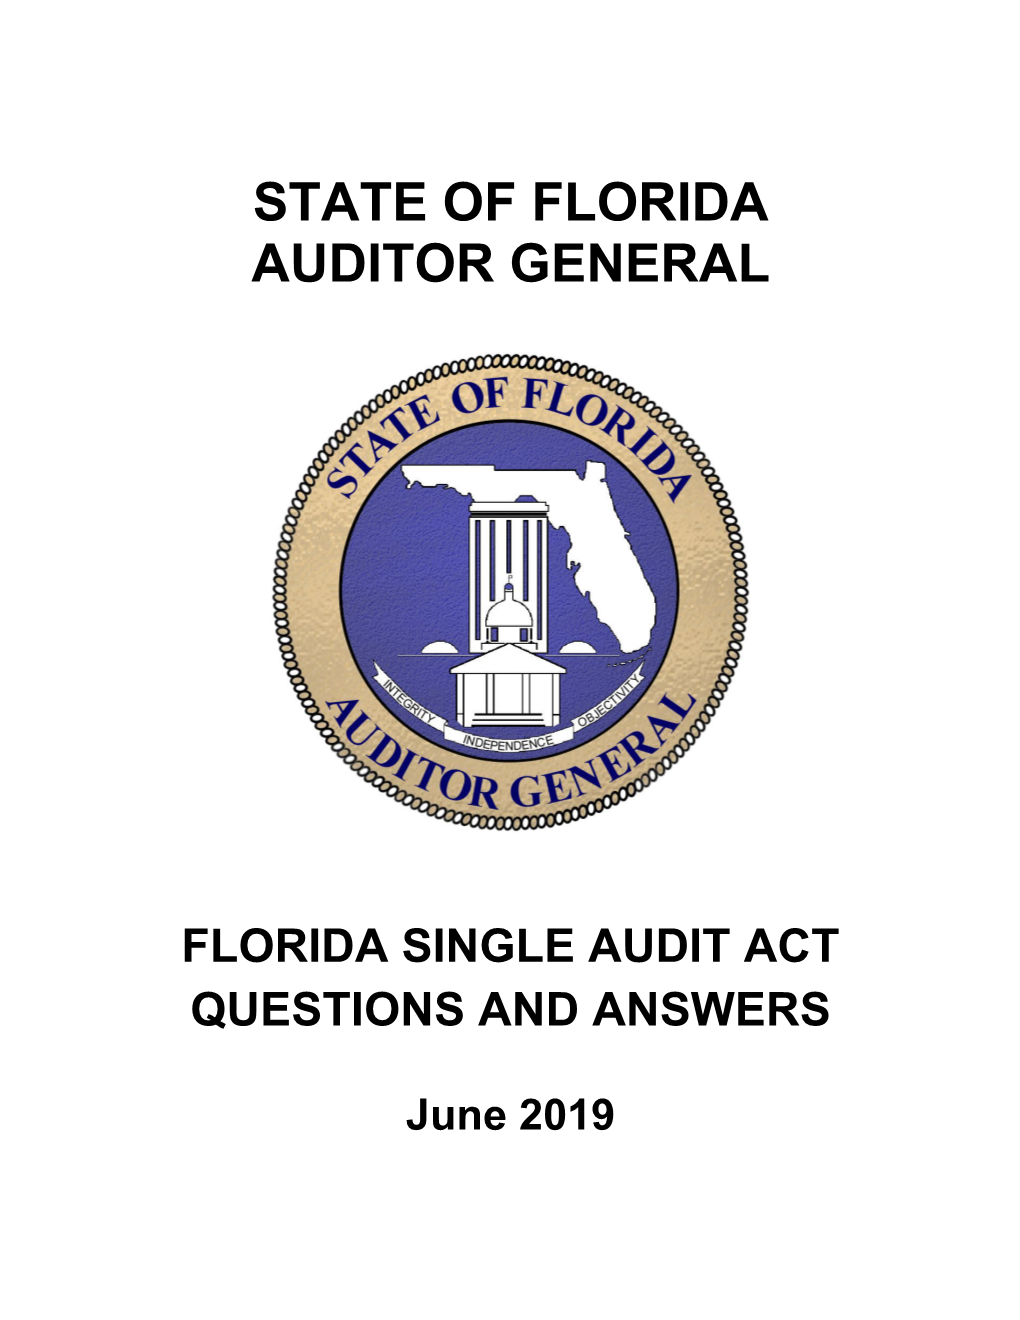 Florida Single Audit Act Questions and Answers